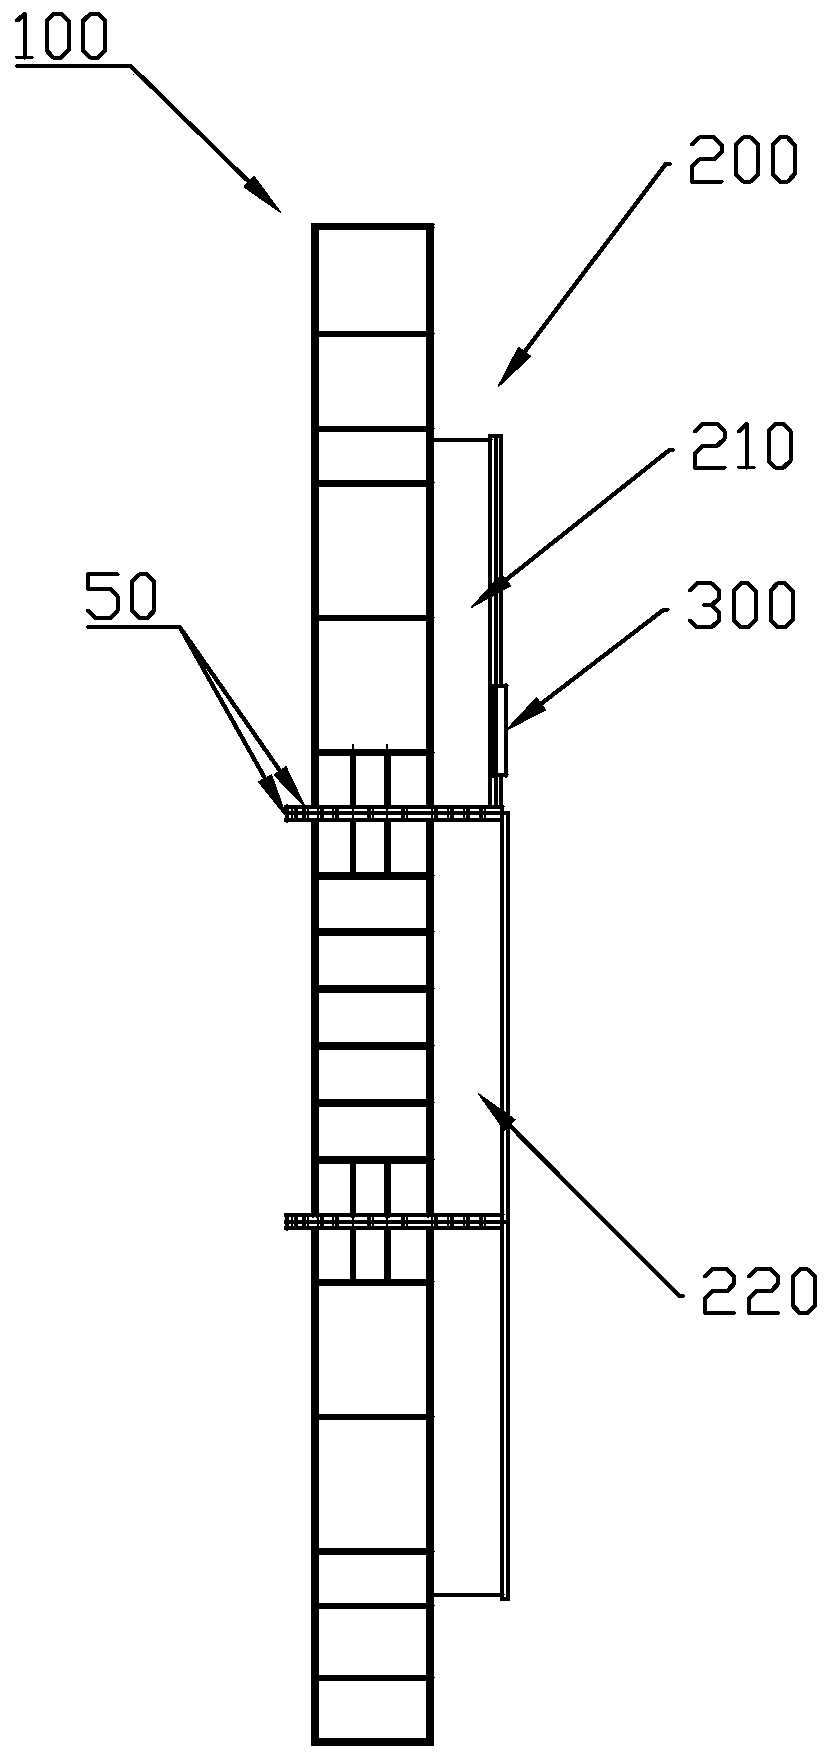 A method for installing a counterforce frame